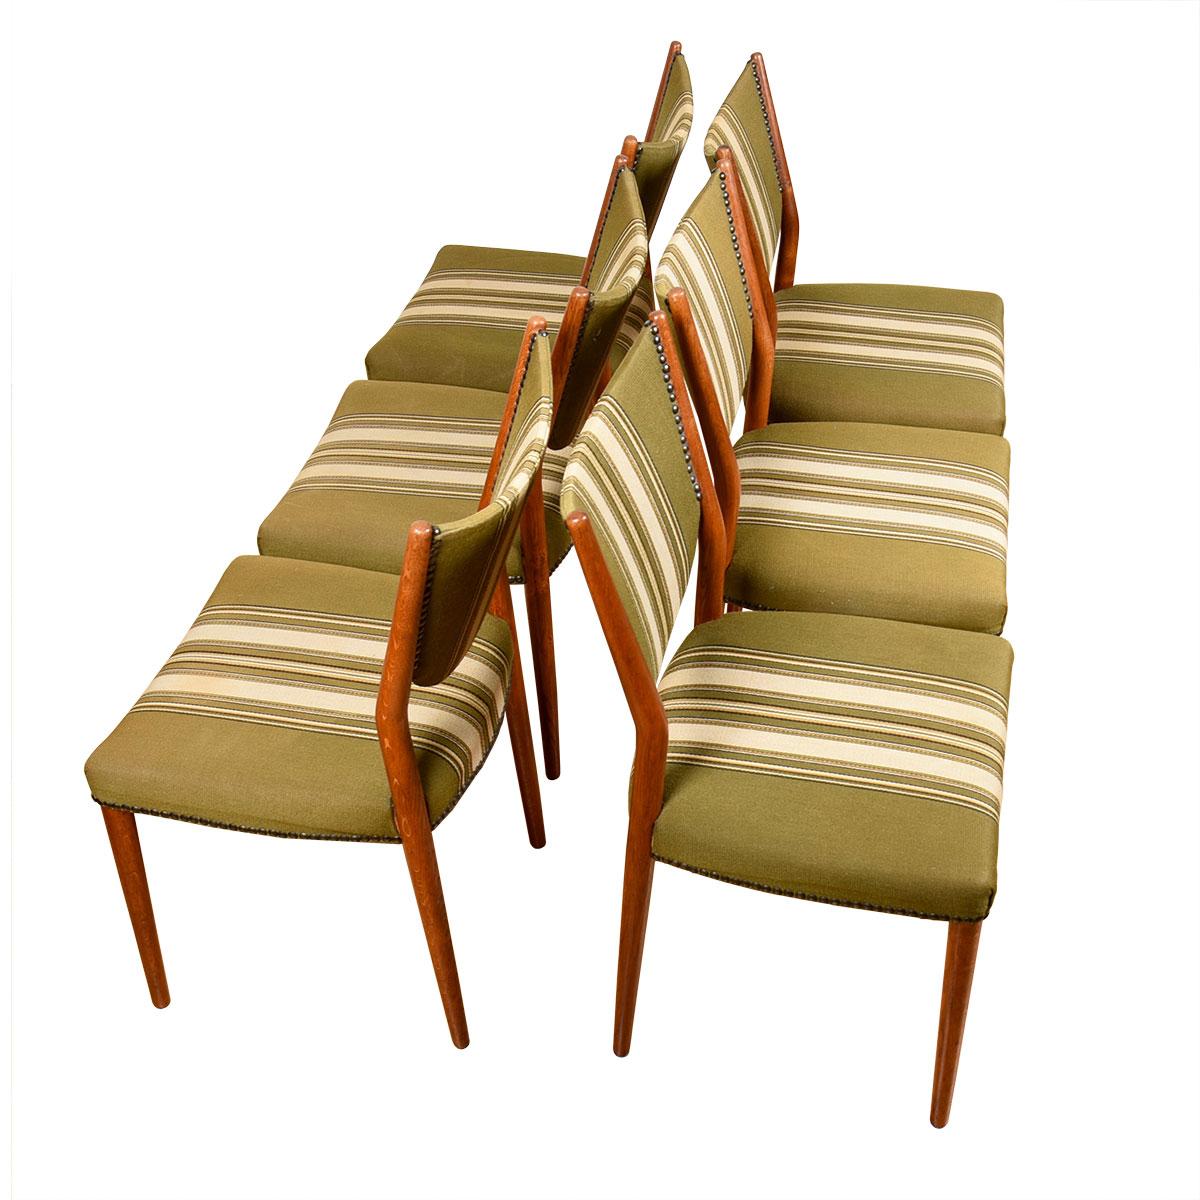 Mid-Century Modern Set of 6 Danish Modern Dining Chairs with Striped Upholstery For Sale